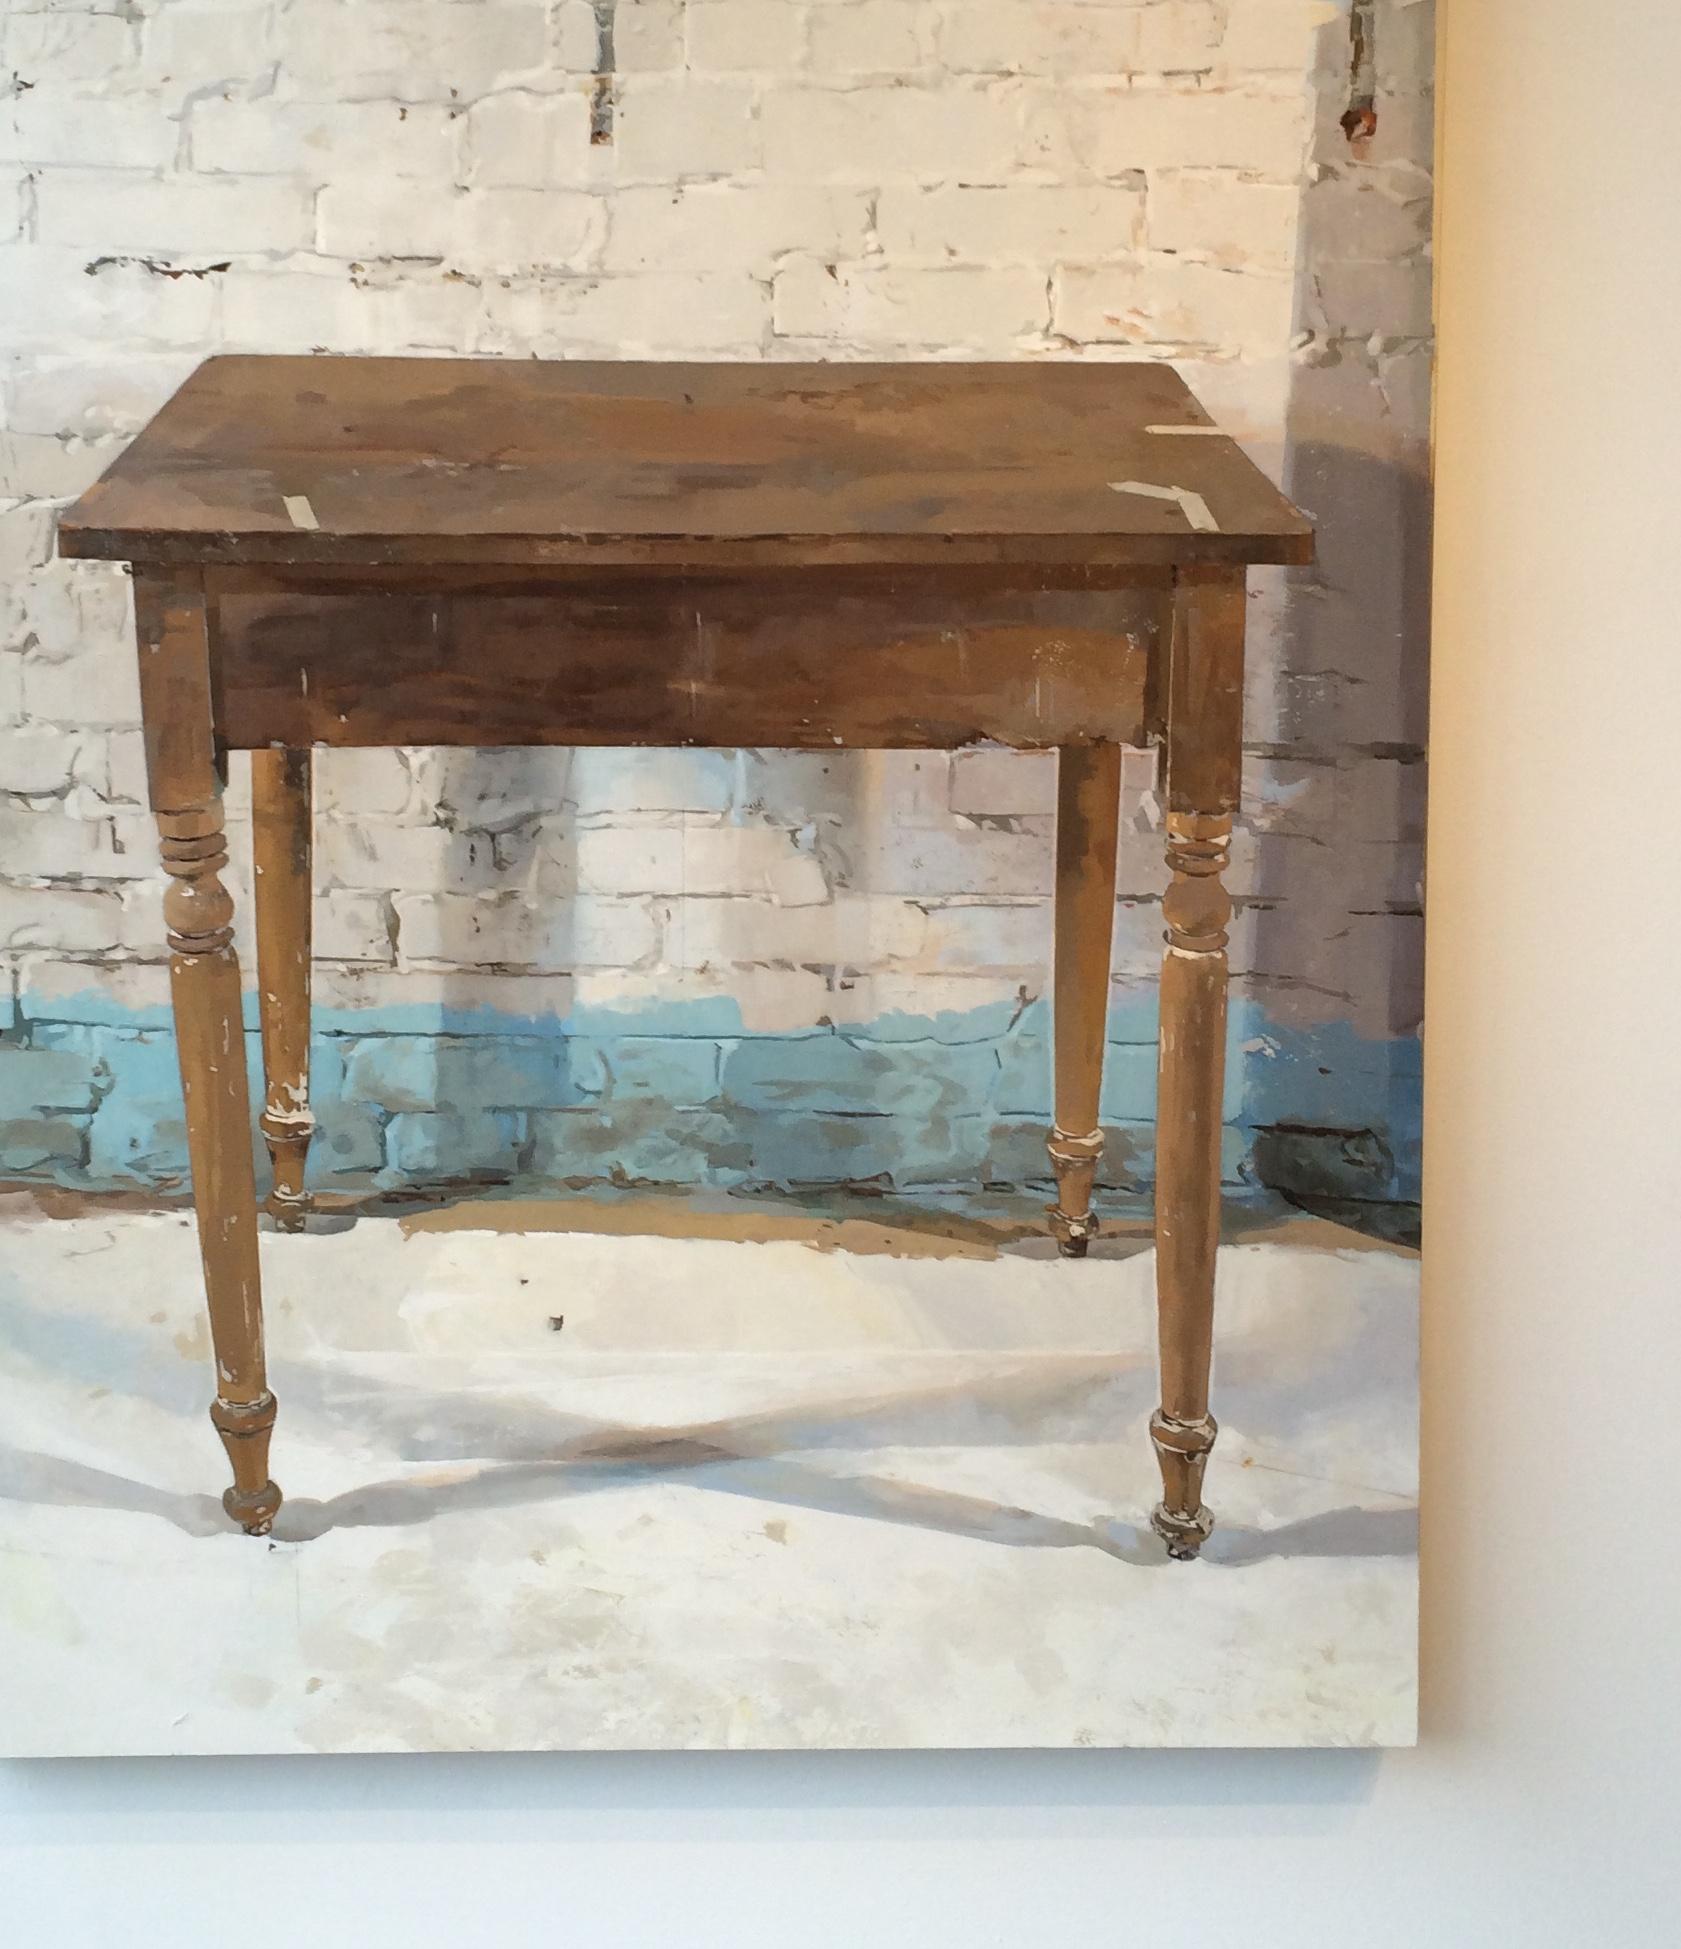 A single wooden table stands against a white brick wall. The solitary piece of furniture is unexpectedly dramatic; a subtle shadow is cast by its legs on the white floor and on the wall behind it. Signed, dated and titled on verso.

Brett